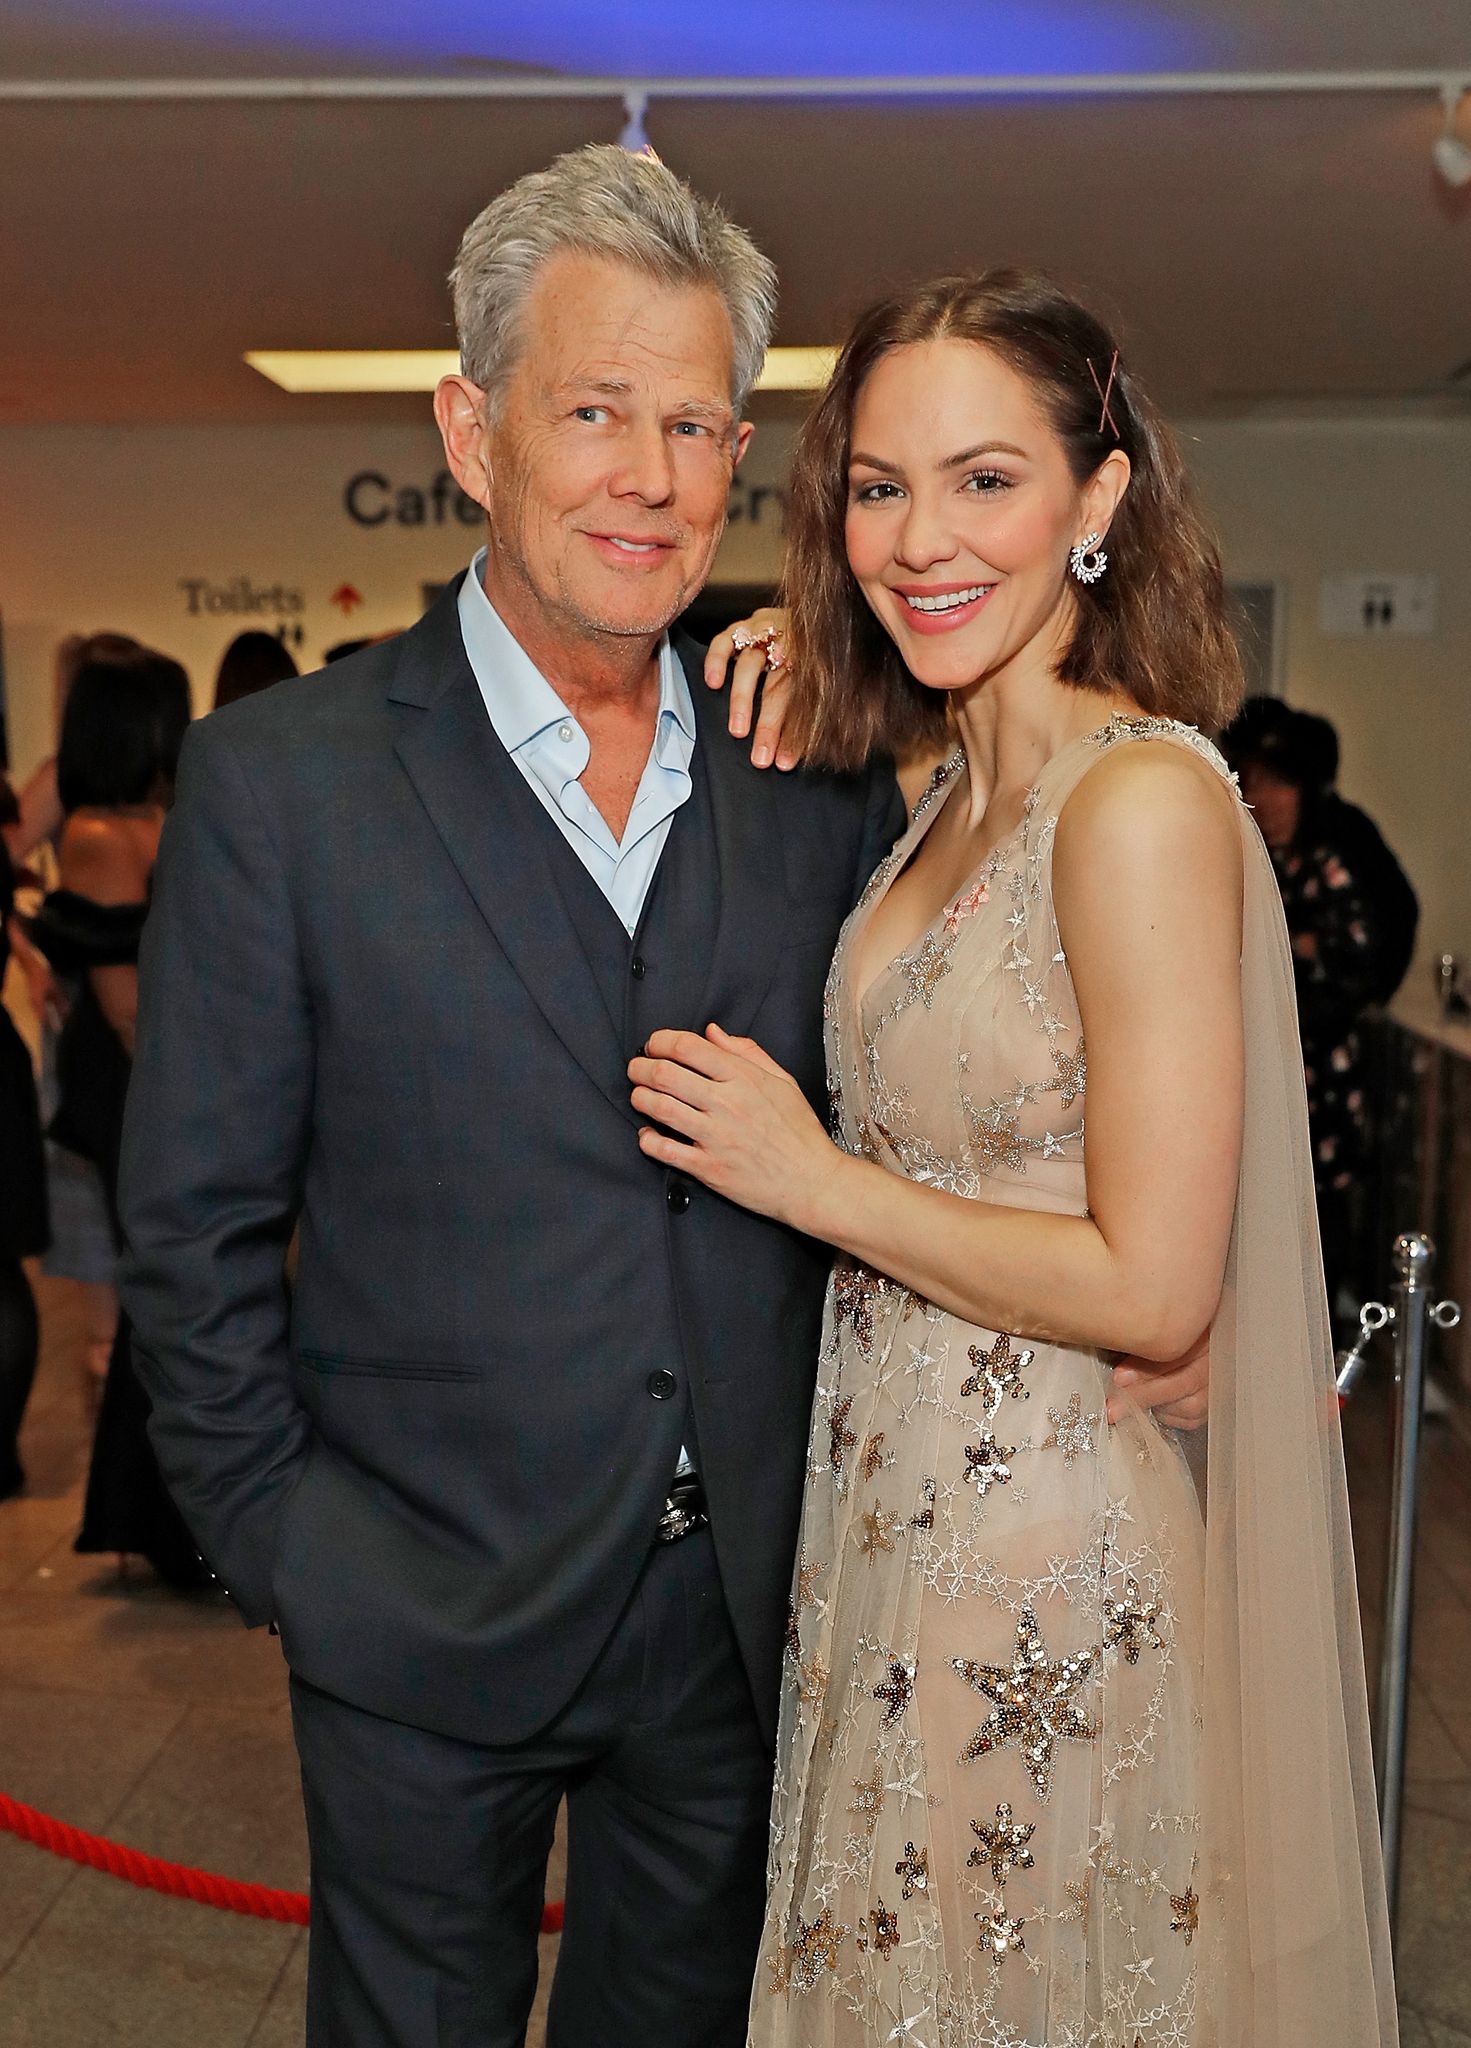 David Foster and Katharine McPhee at the press night after party for "Waitress: The Musical" on March 7, 2019 in London, England. | Photo: Getty Images